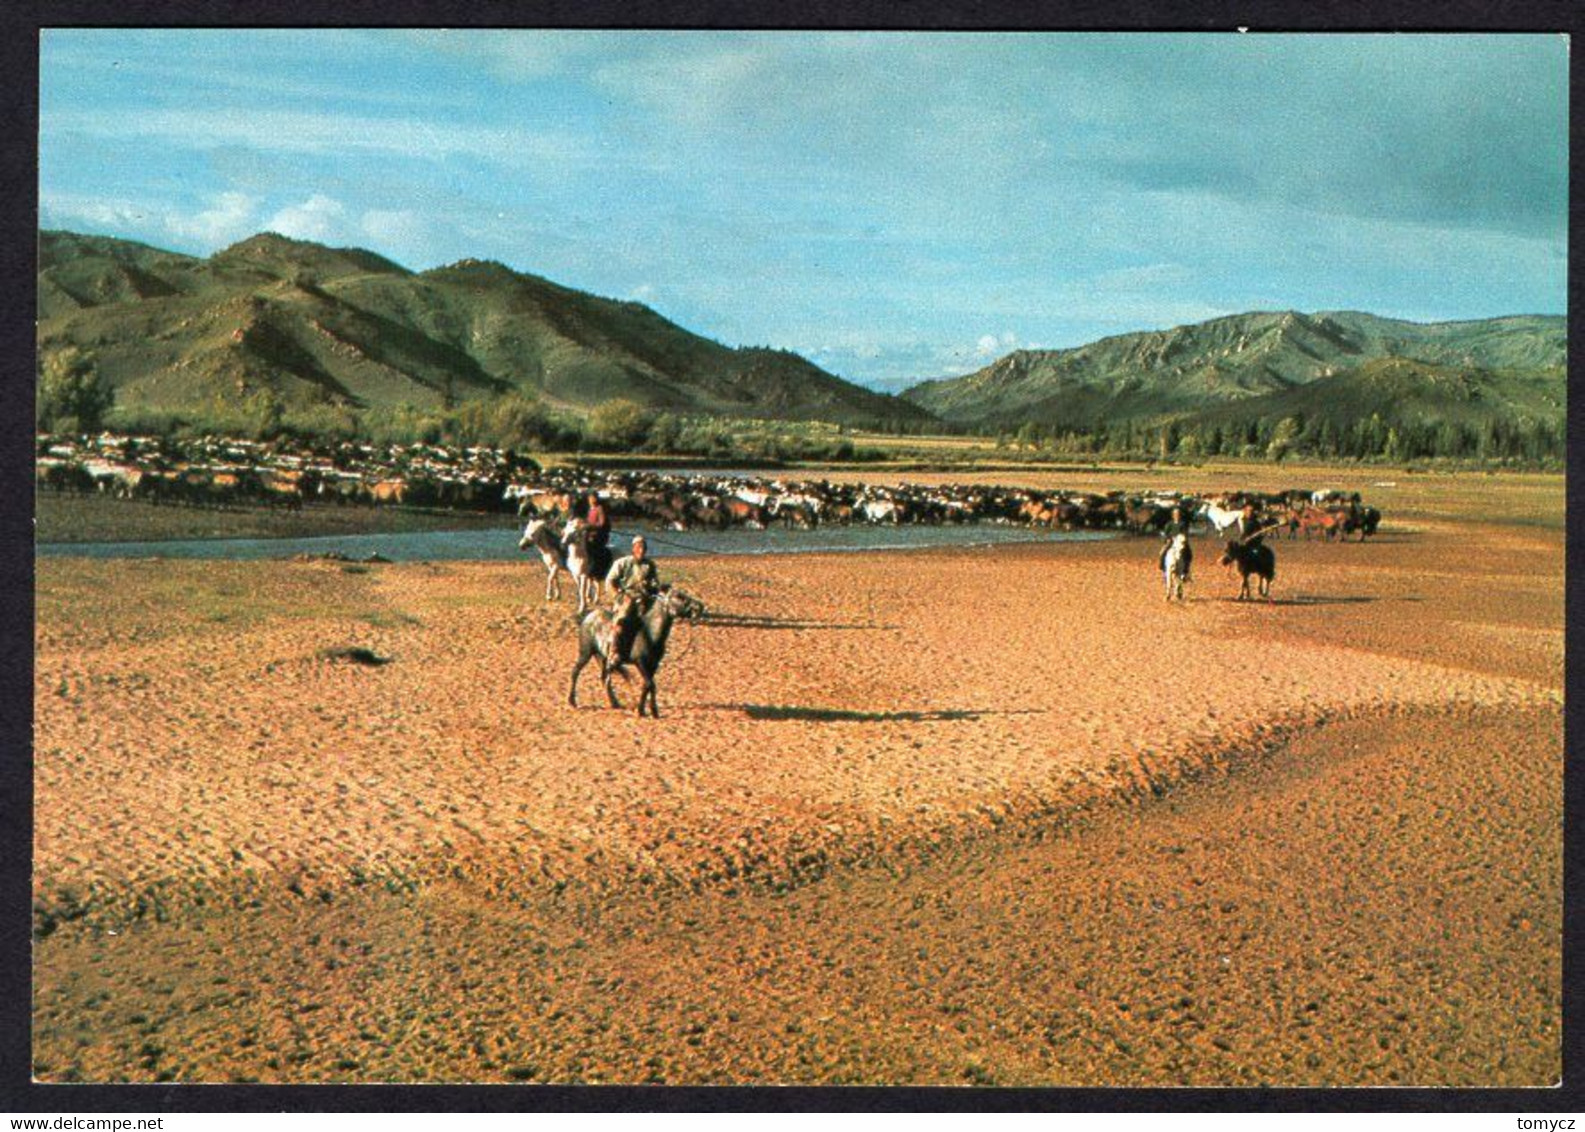 12x postcards Mongolia 197?-198?, used, not used